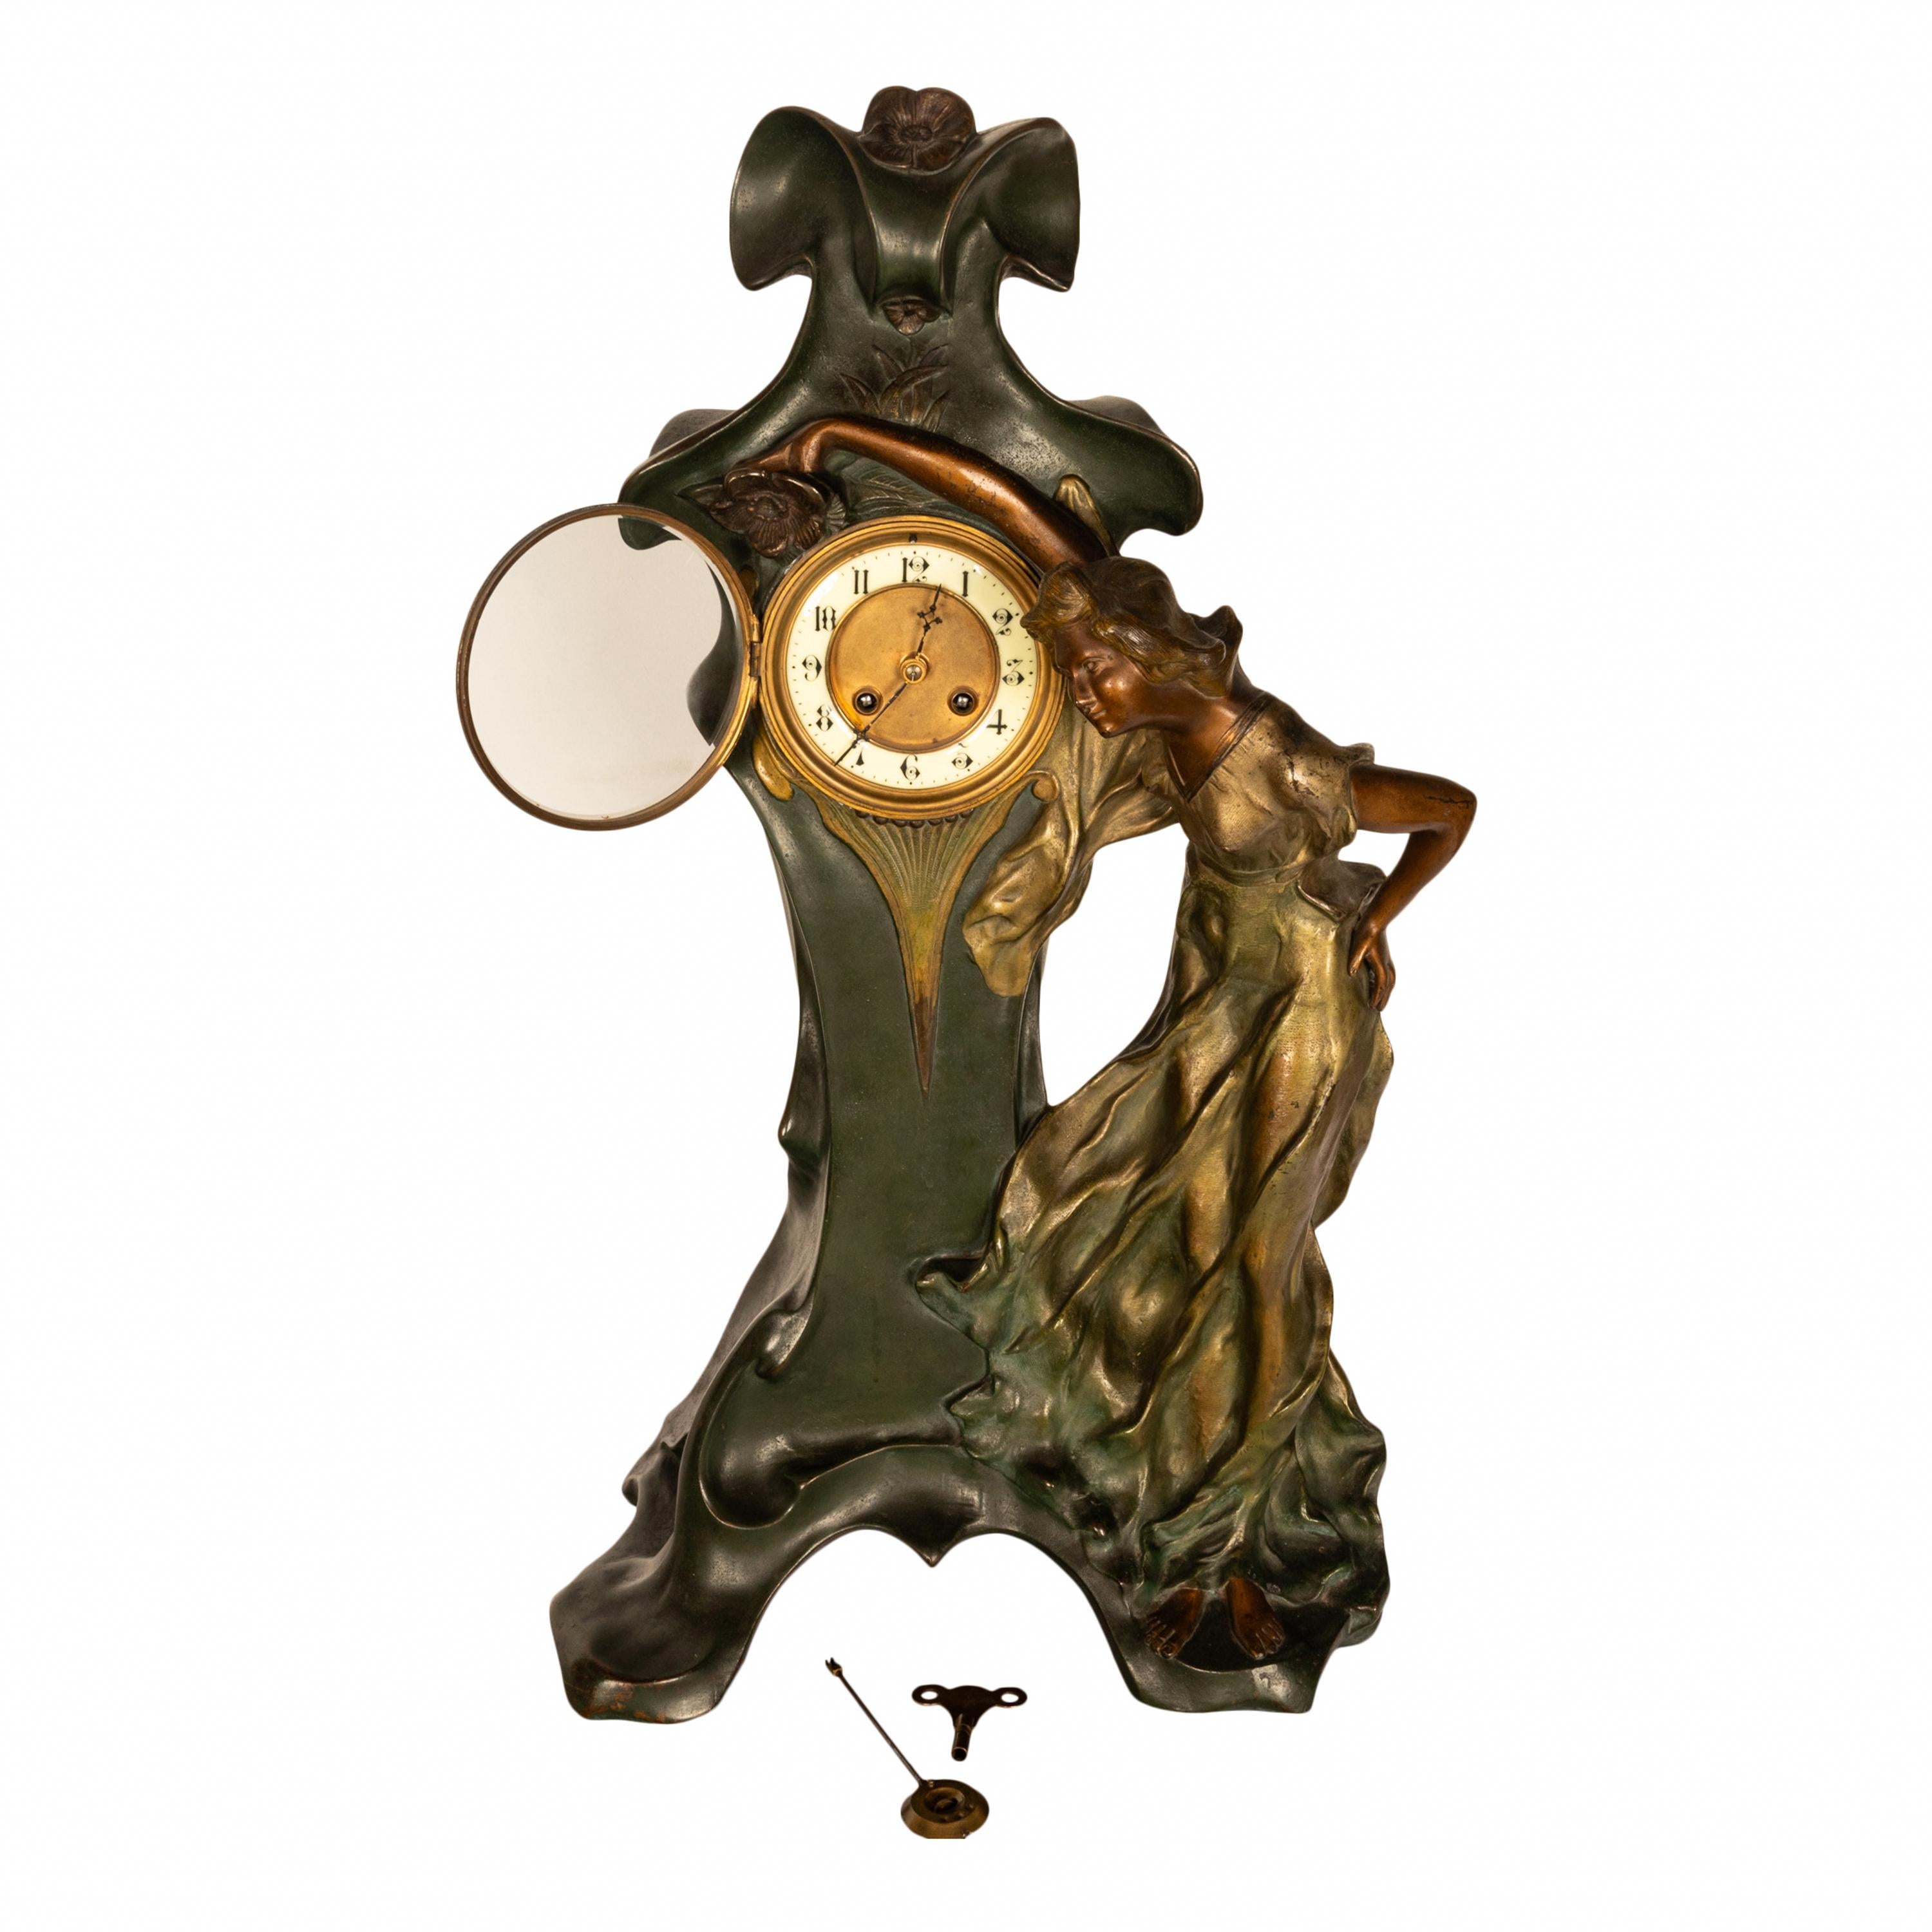 A fine & very large antique French Art Nouveau figural statue clock, circa 1900.
The clock is made of cast bronze and depicts a beautiful young maiden in diaphanous Art Nouveau dress, she is draped around the clock case which has a very organic